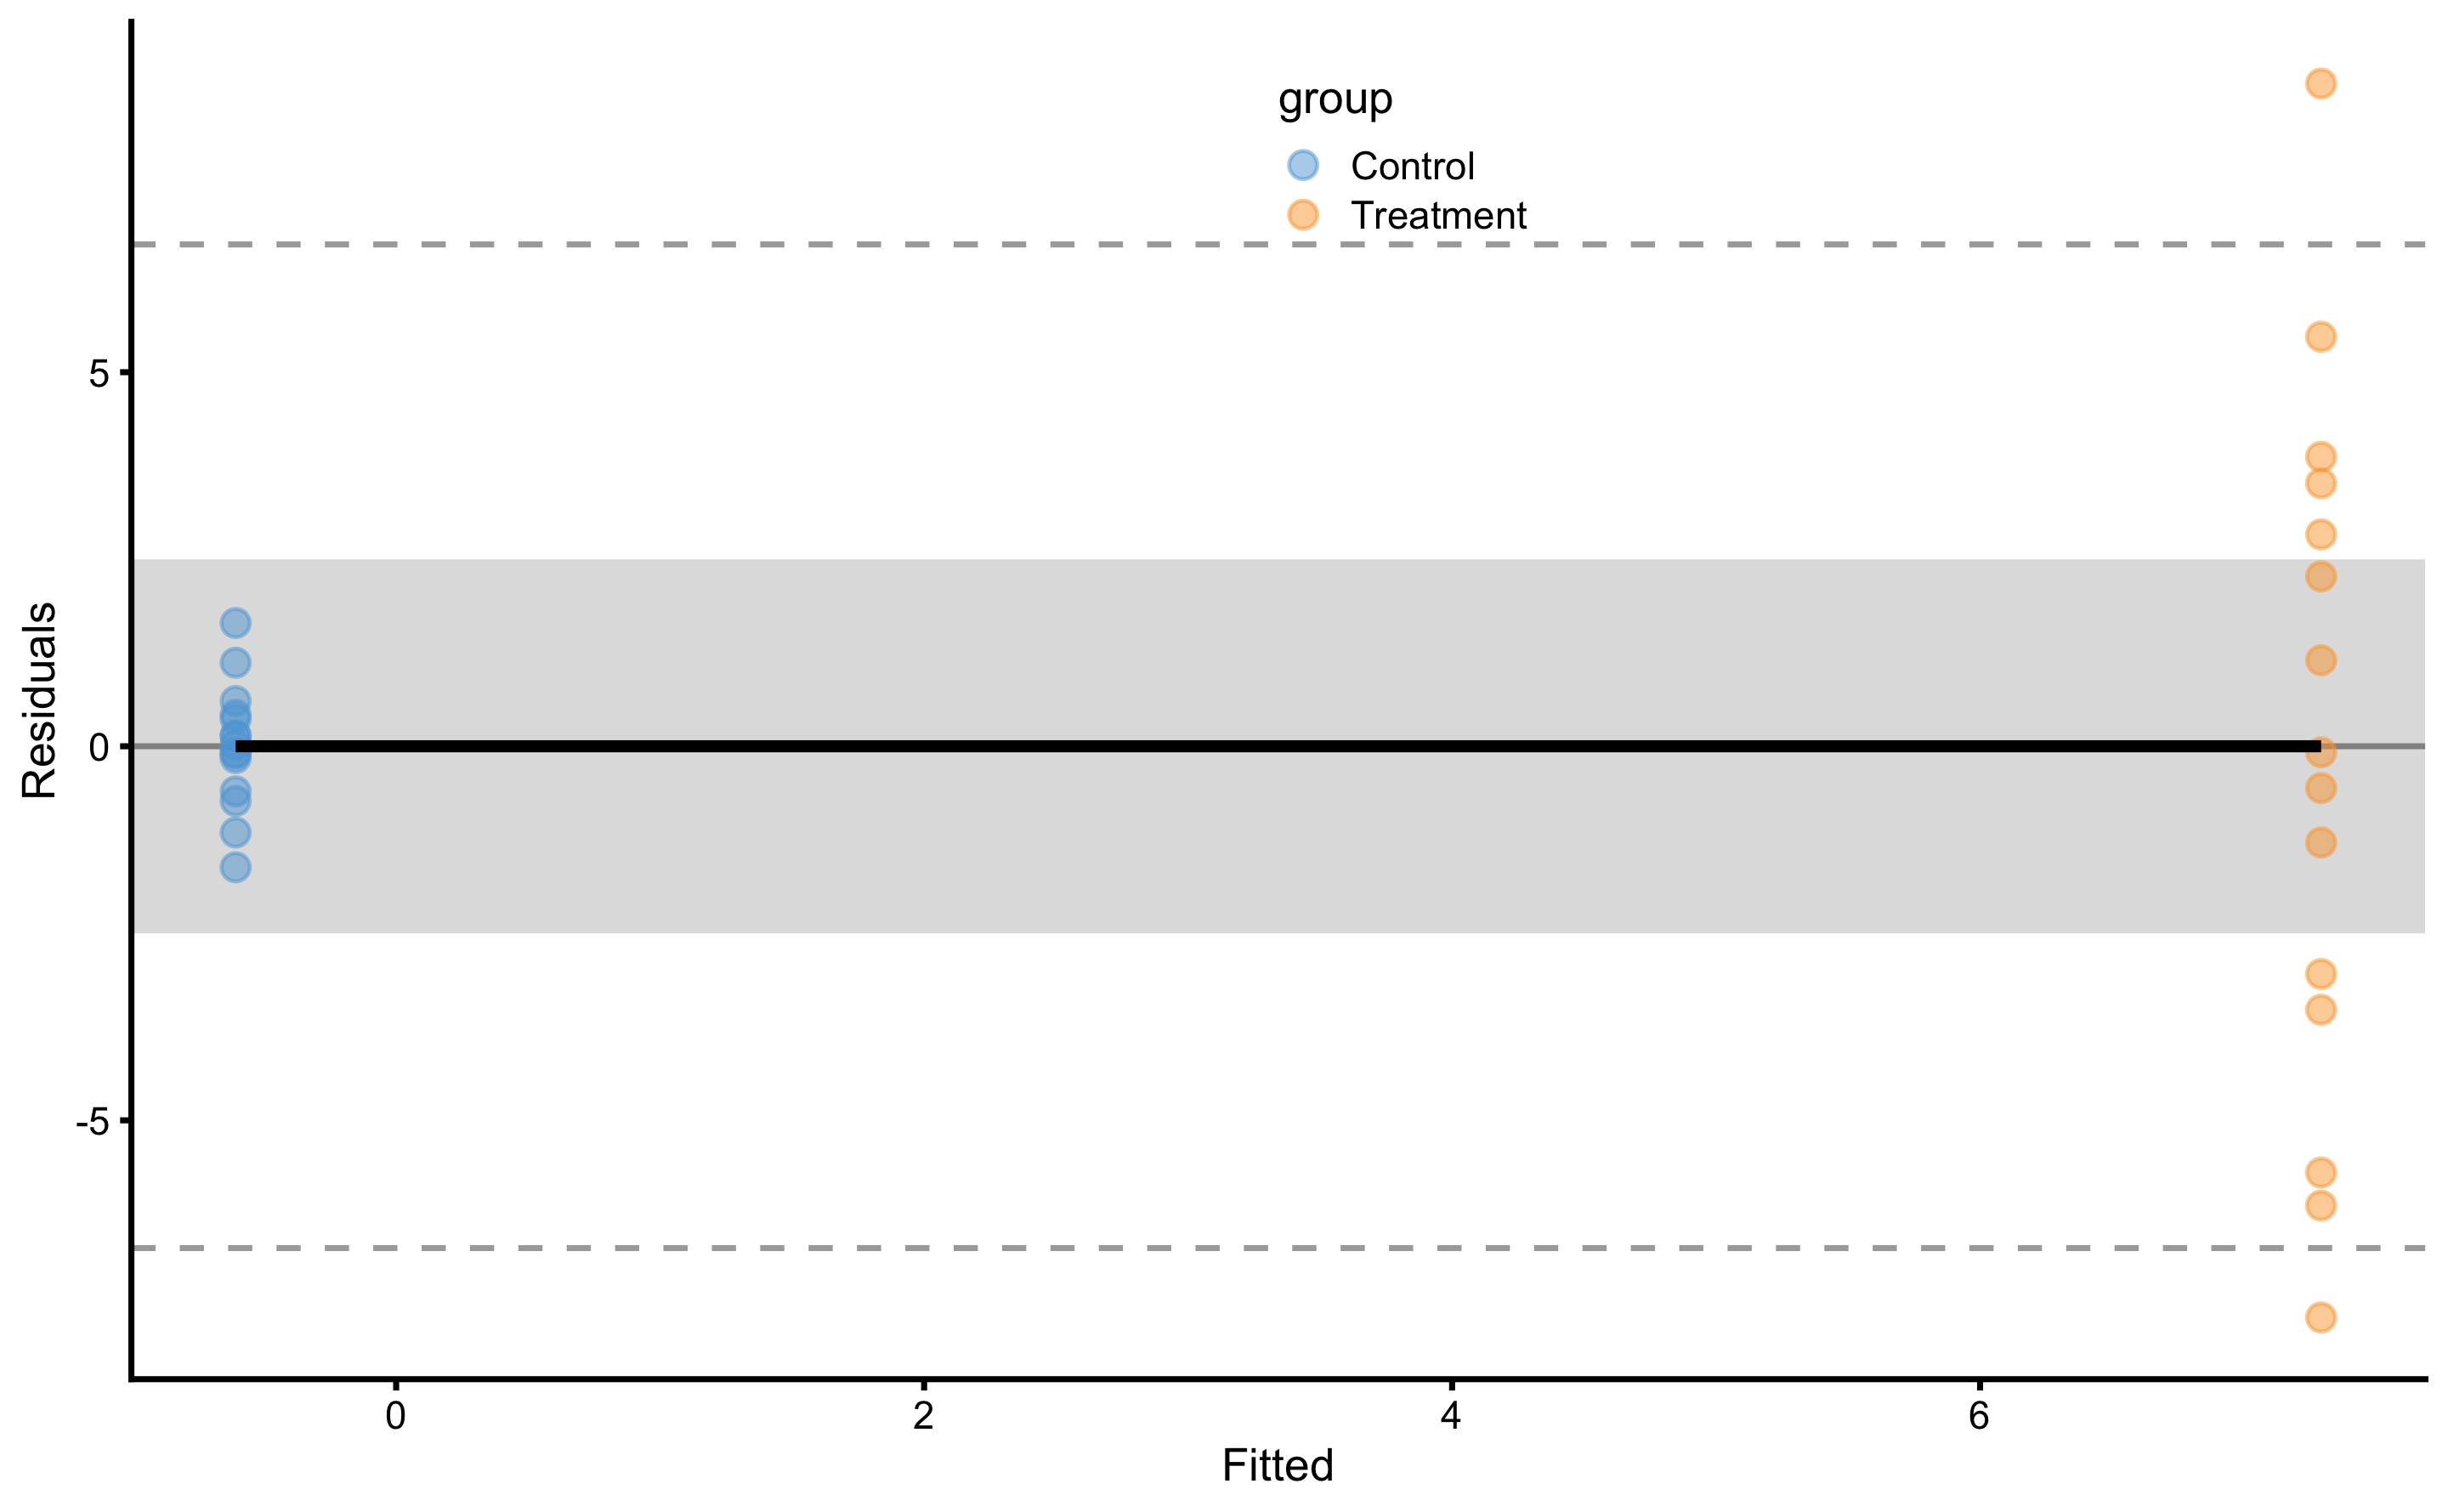 Model residuals using simple linear regression RCT model. Grey band represents SESOI of ±2.5cm. Residuals are color coded; blue are Control group and orange are Treatment group.